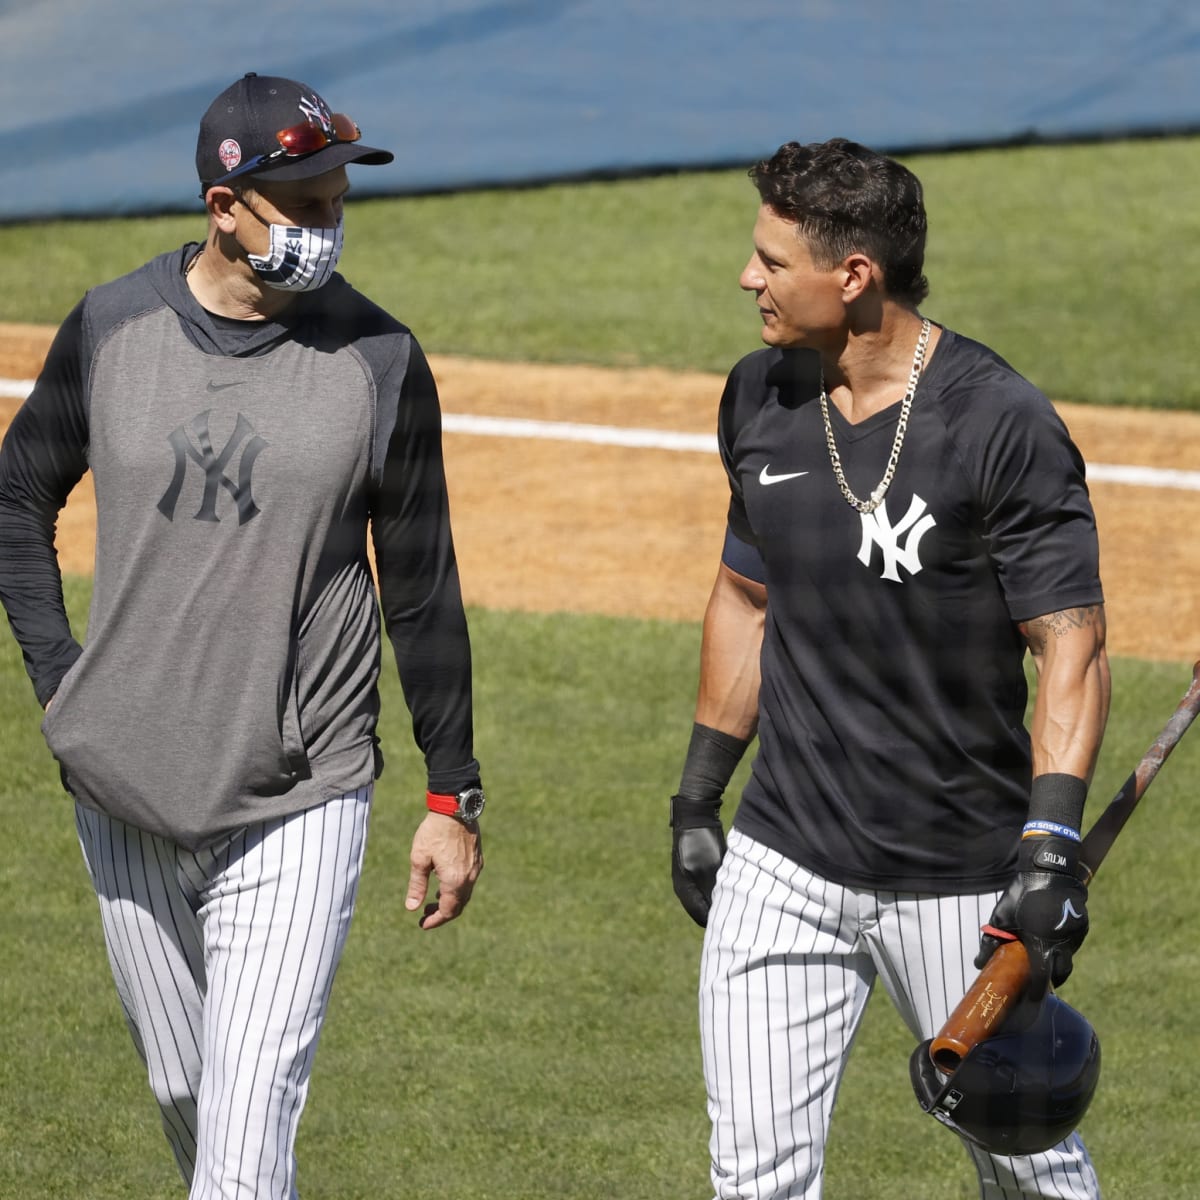 Derek Dietrich is eager for opportunity with the New York Yankees